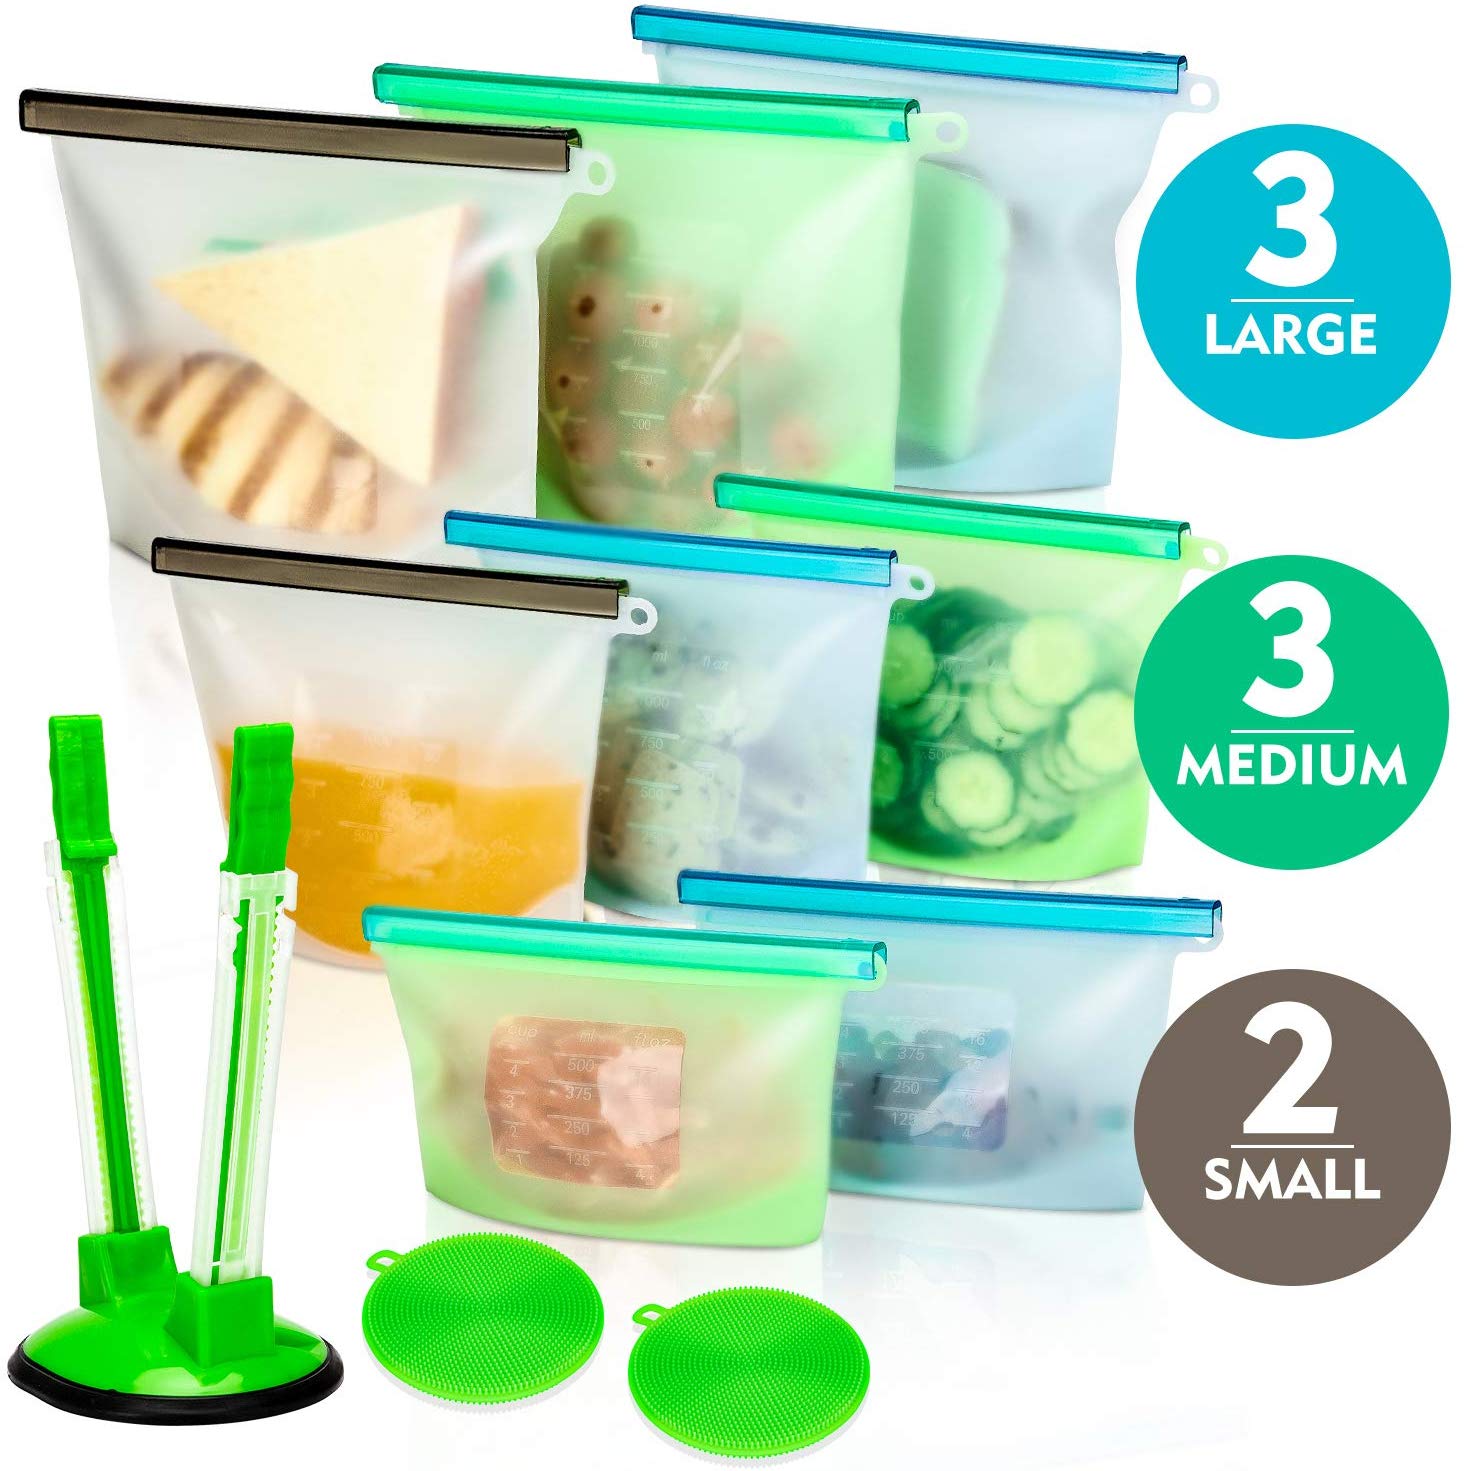 Reusable Silicone Food Storage Bags (5 x Medium) for Sandwich